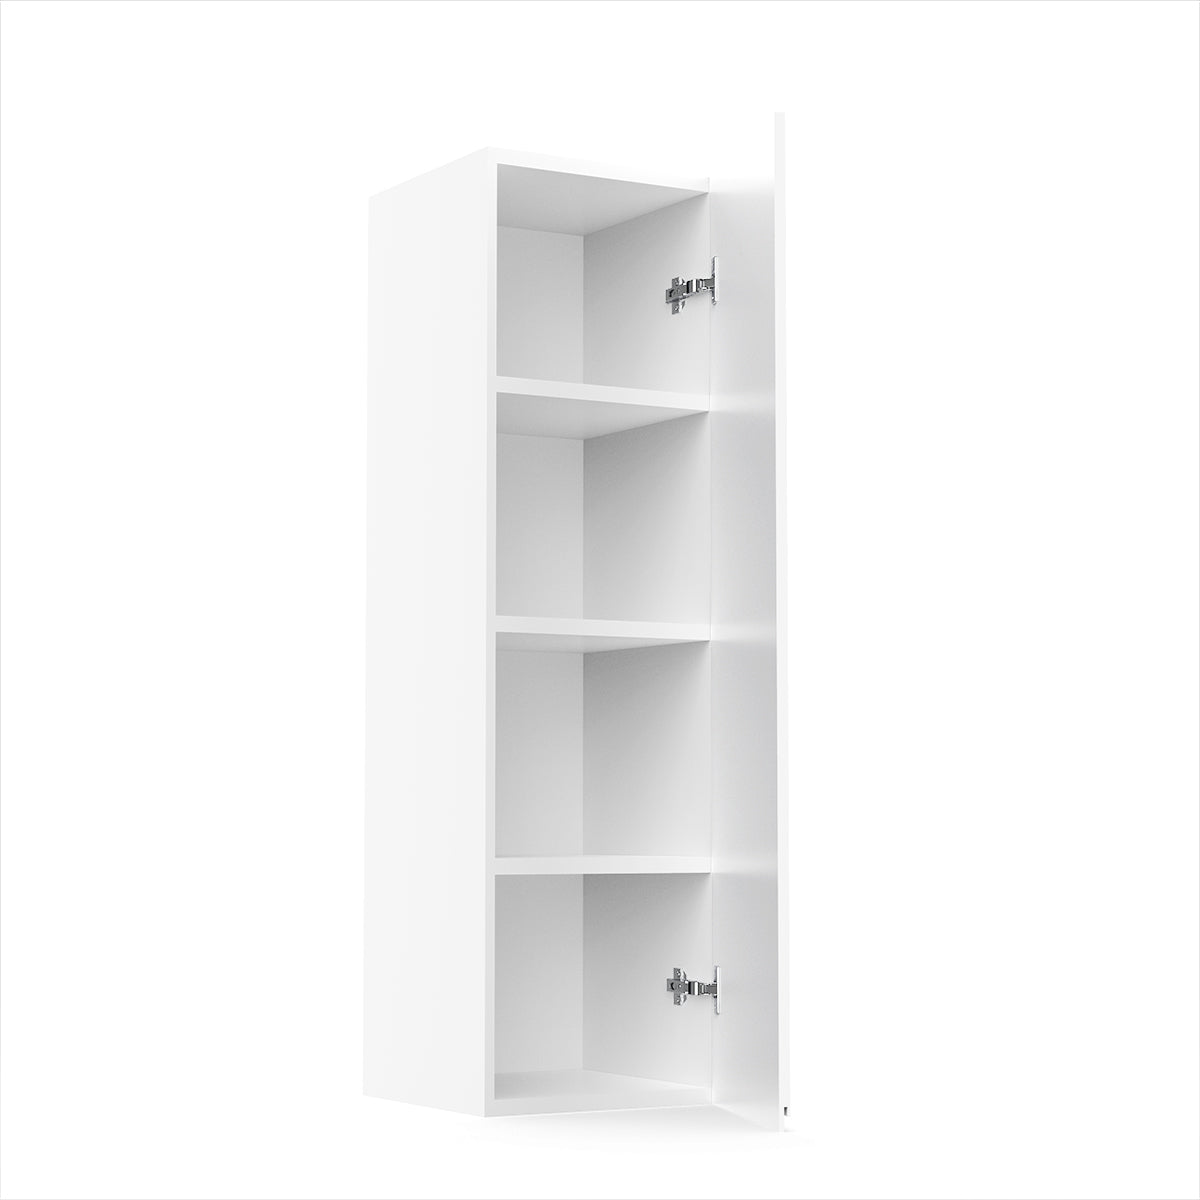 Kitchen Wall Cabinet - RTA - Lacquer white - Single Door Wall Cabinet | 12"W x 42"H x 12"D